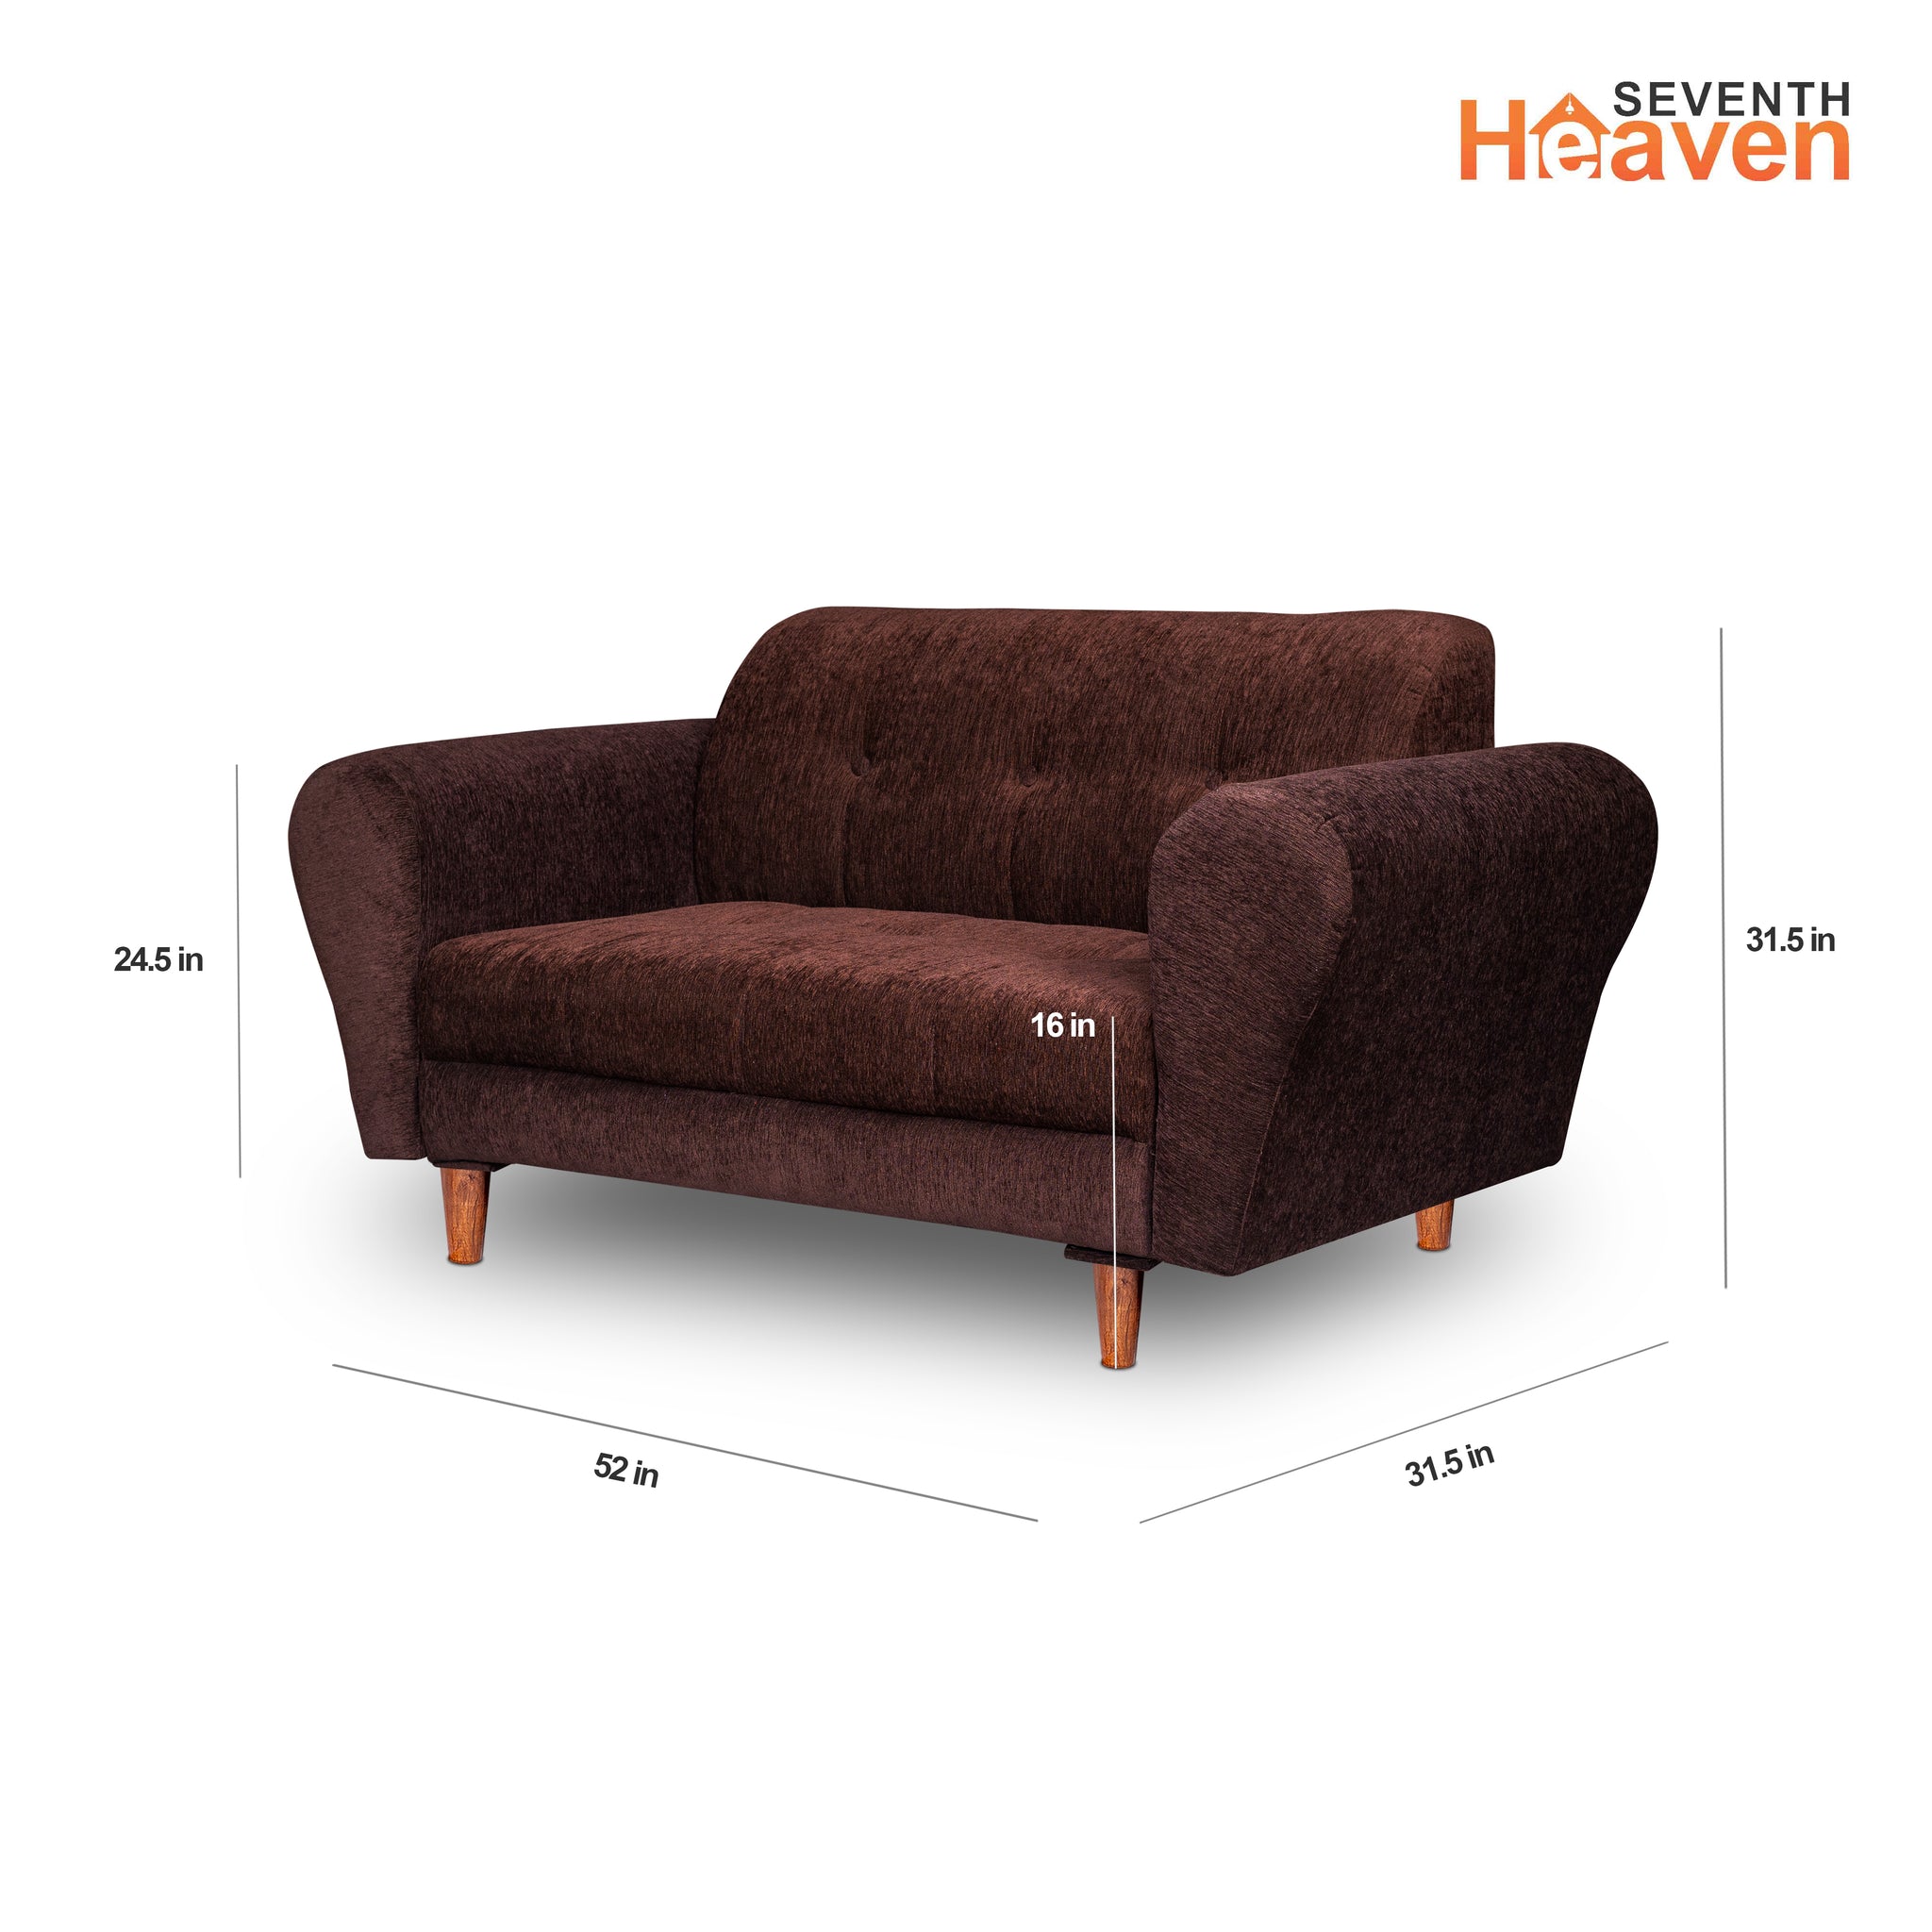 Seventh Heaven Milan 2 Seater Wooden Sofa Set Modern & Elegant Smart Furniture Range for luxurious homes, living rooms and offices. Brown Colour Molphino fabric with sheesham polished wooden legs.Product dimensions are also mentioned.